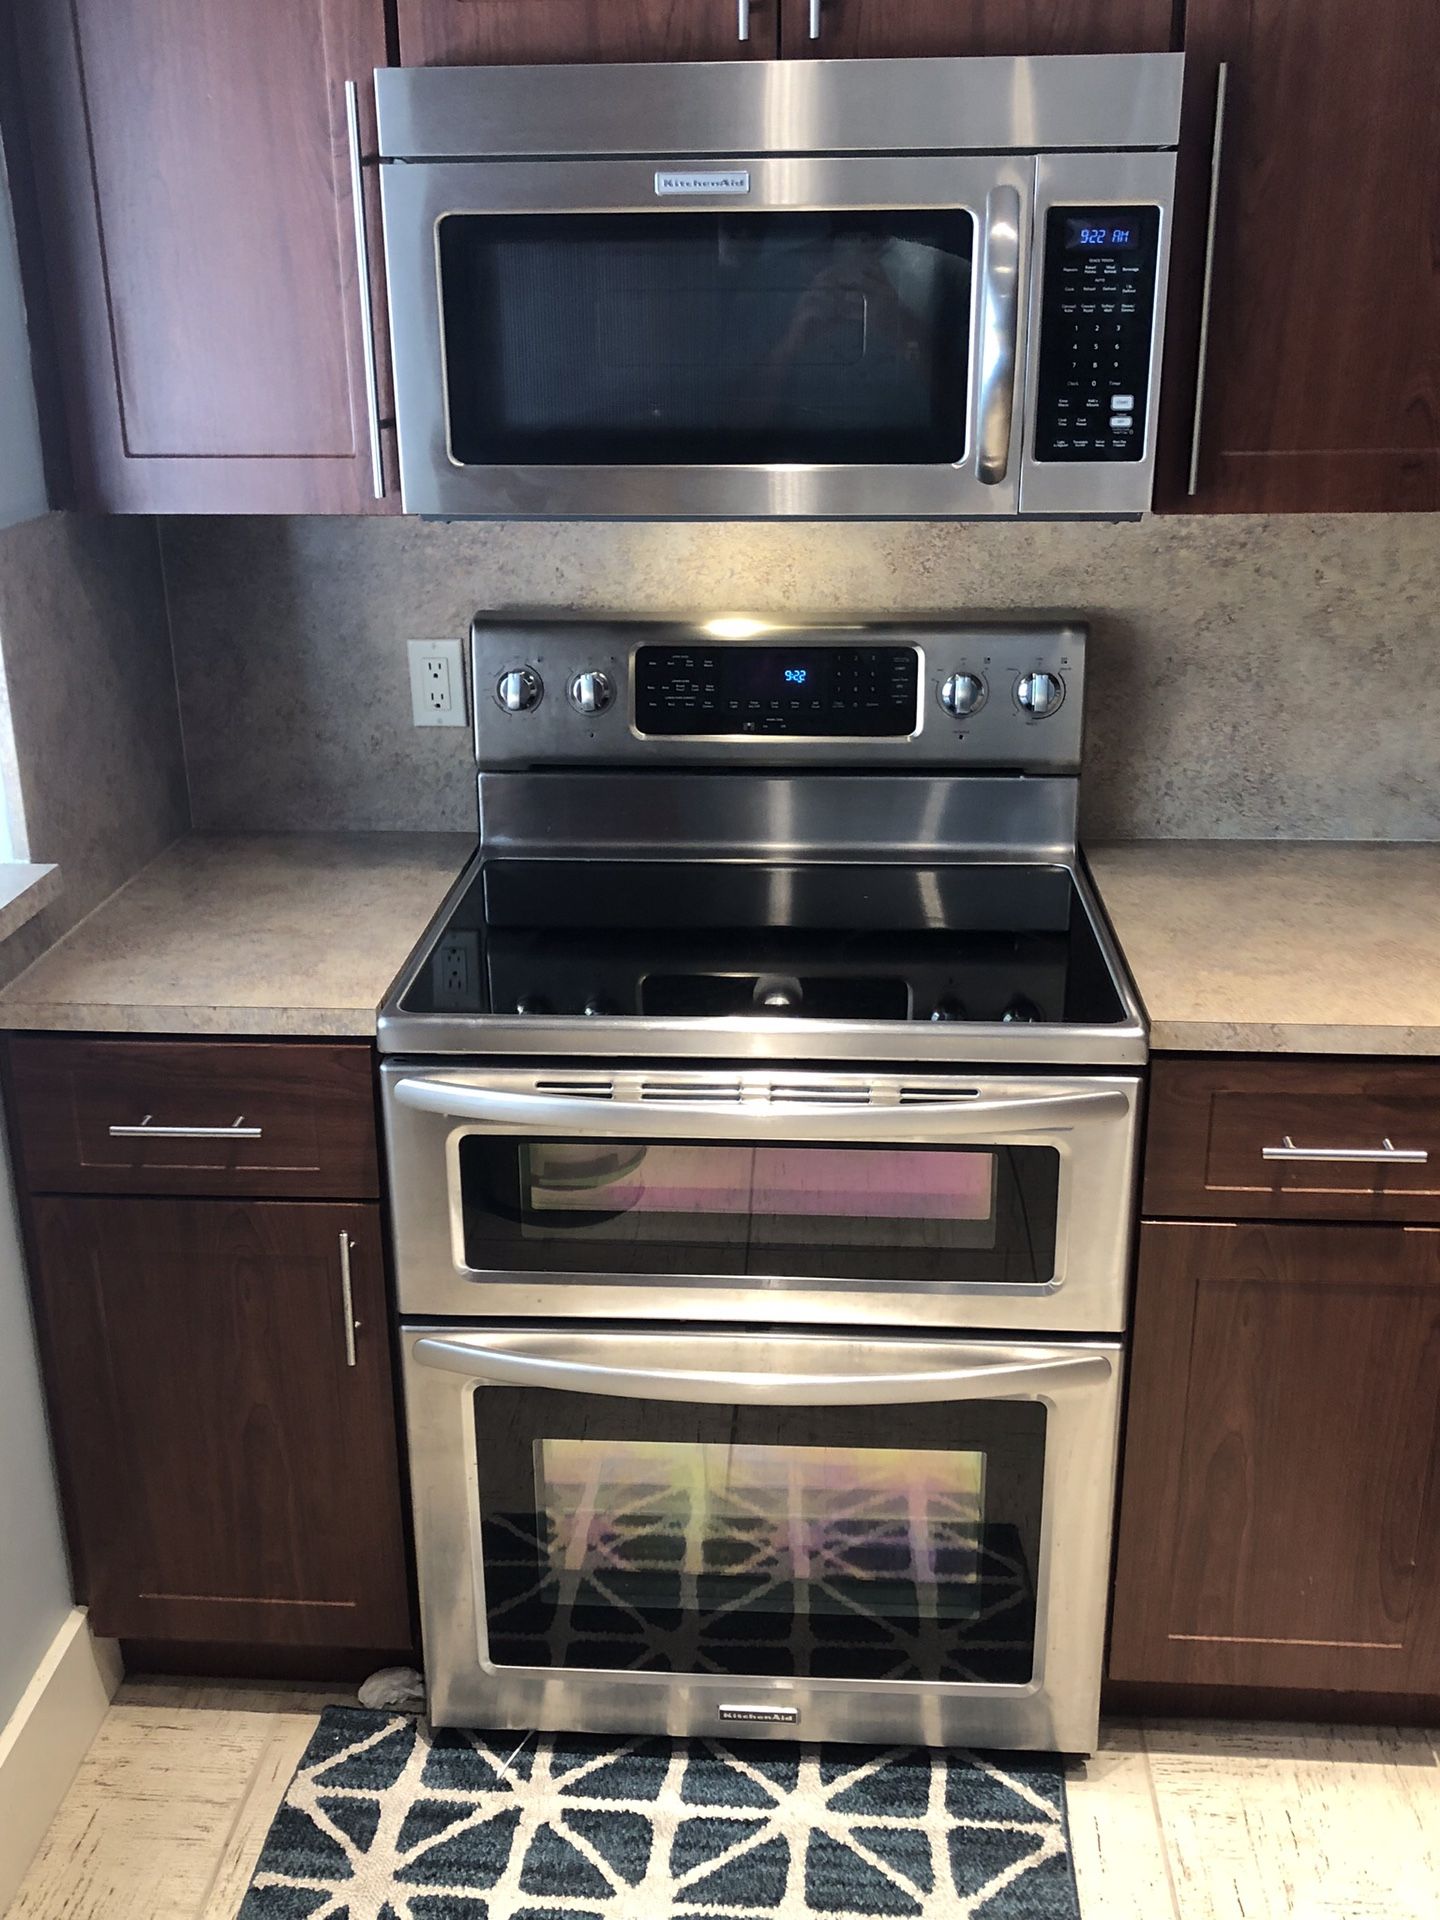 Full set of stainless steel Kitchen Aid appliances